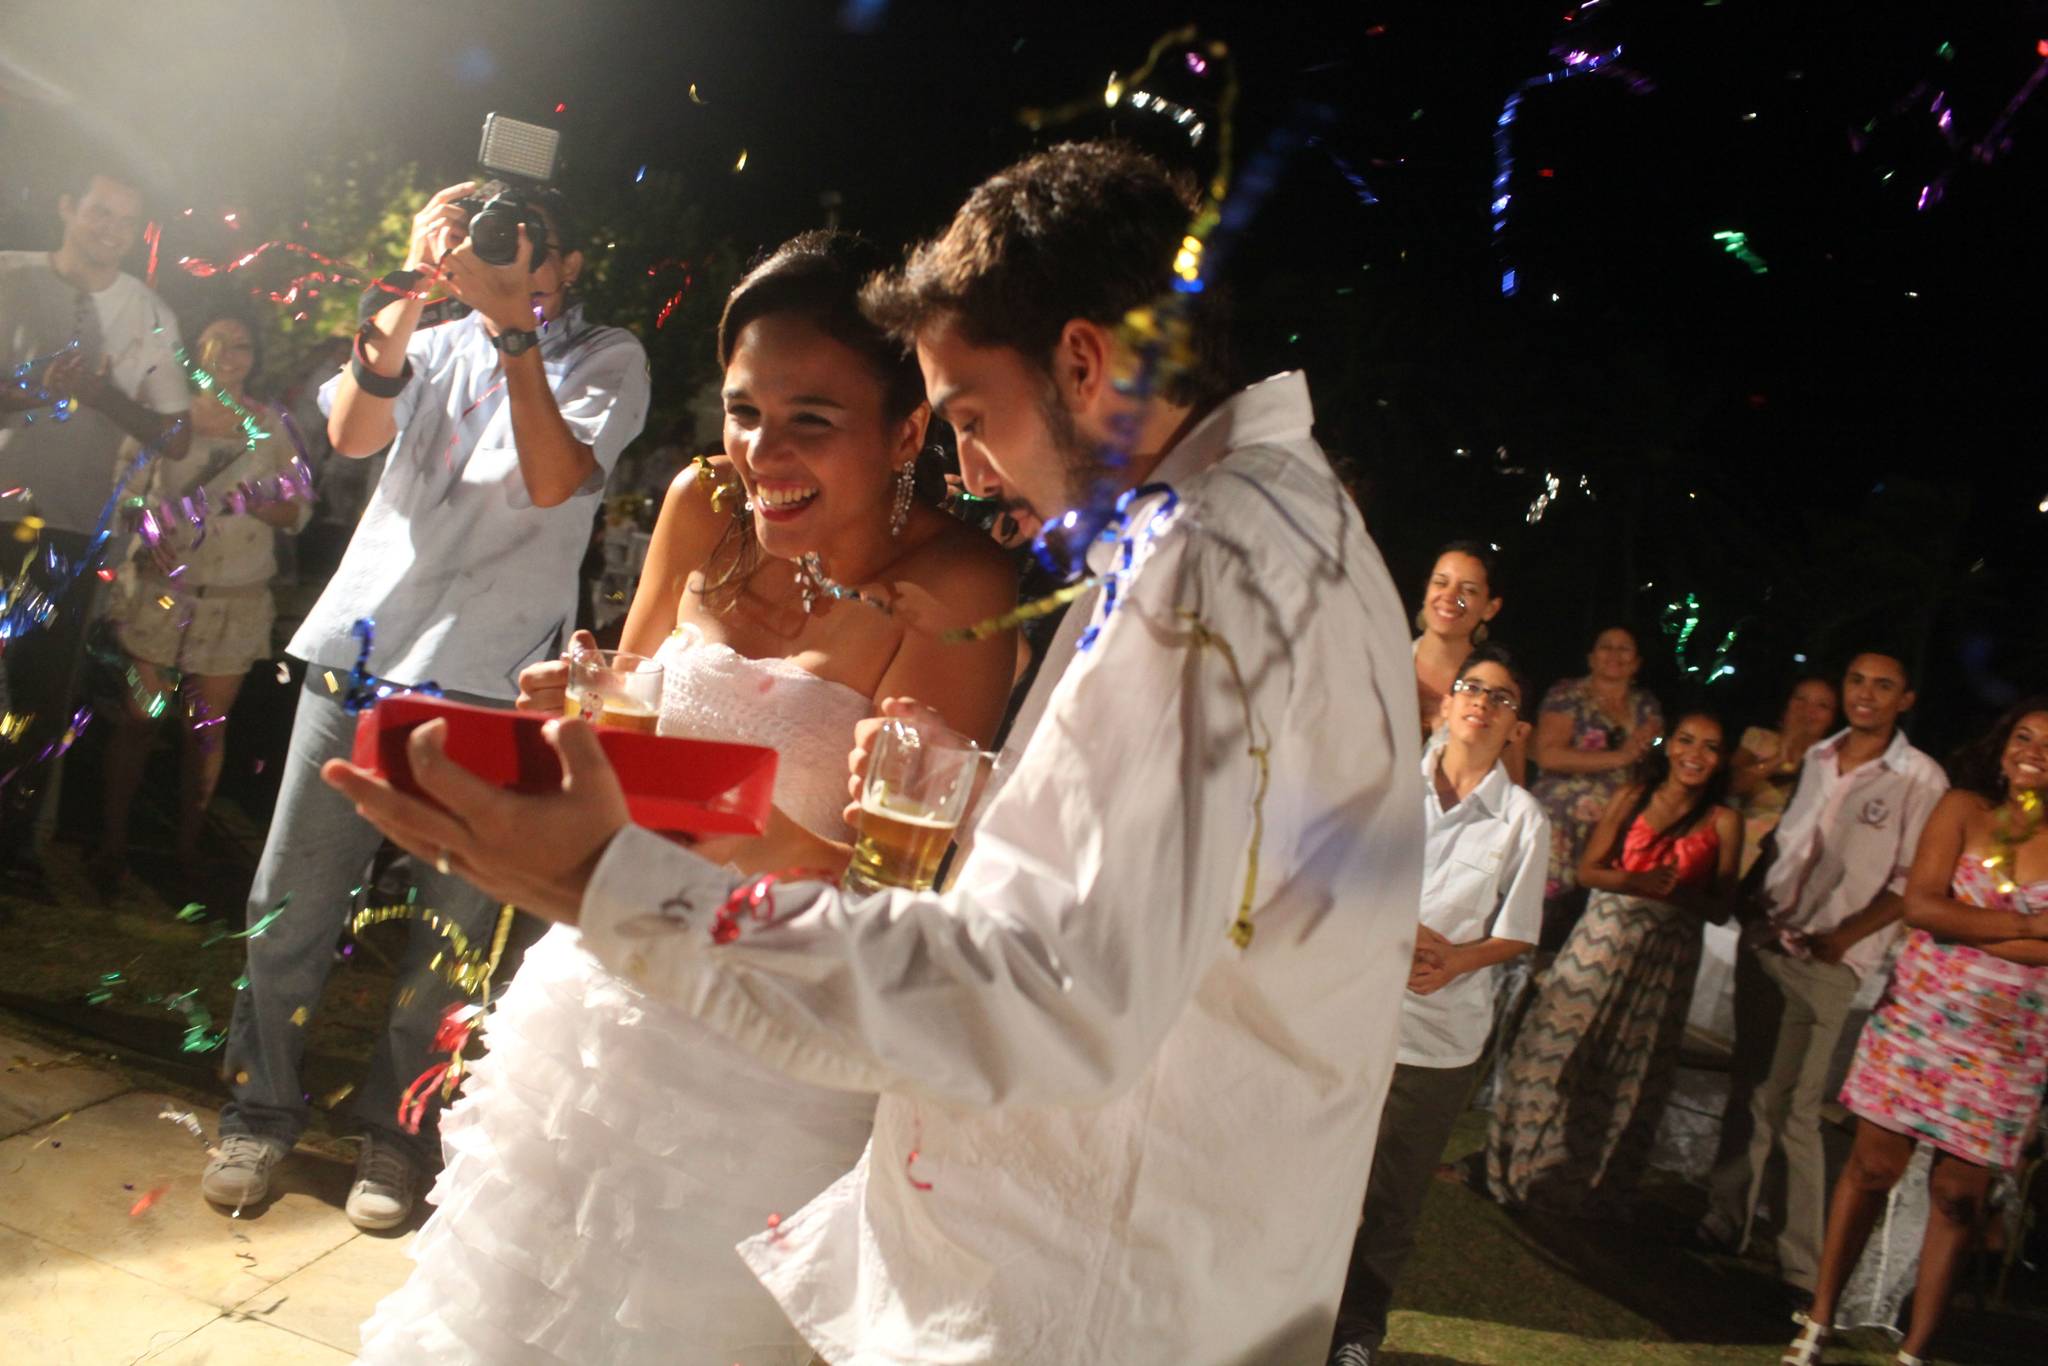 Are Brazilian weddings just an excuse to party?